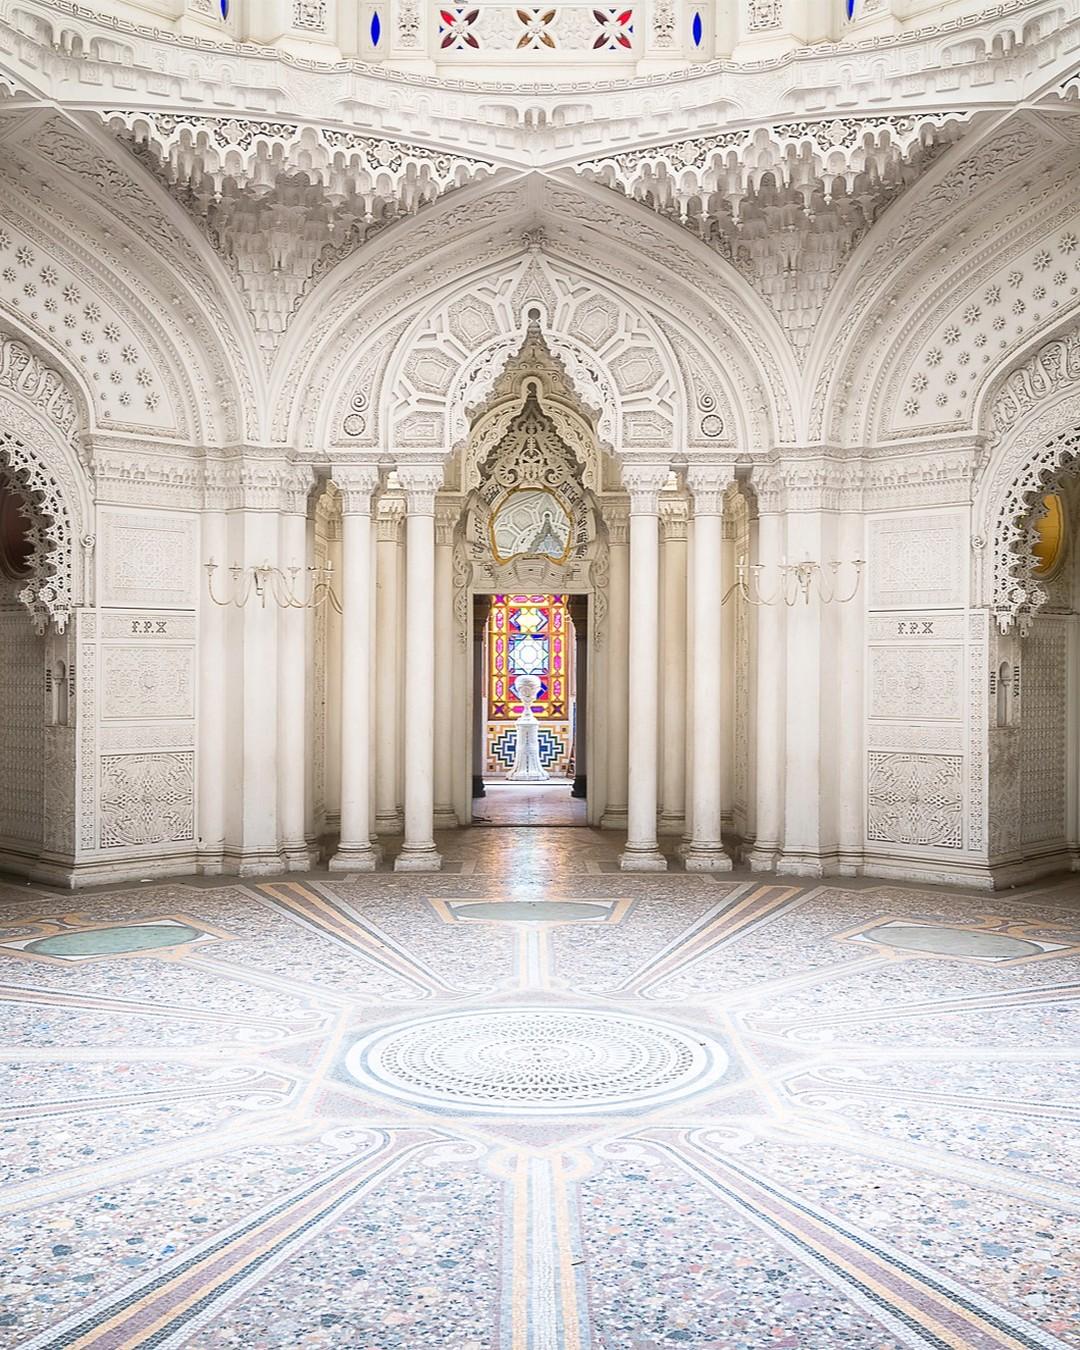 A view from inside Castle di Sammezzano. (Courtesy of <a href="https://romanrobroek.nl/">Roman Robroek Photography</a> and <a href="https://www.instagram.com/romanrobroek/">@romanrobroek</a>)